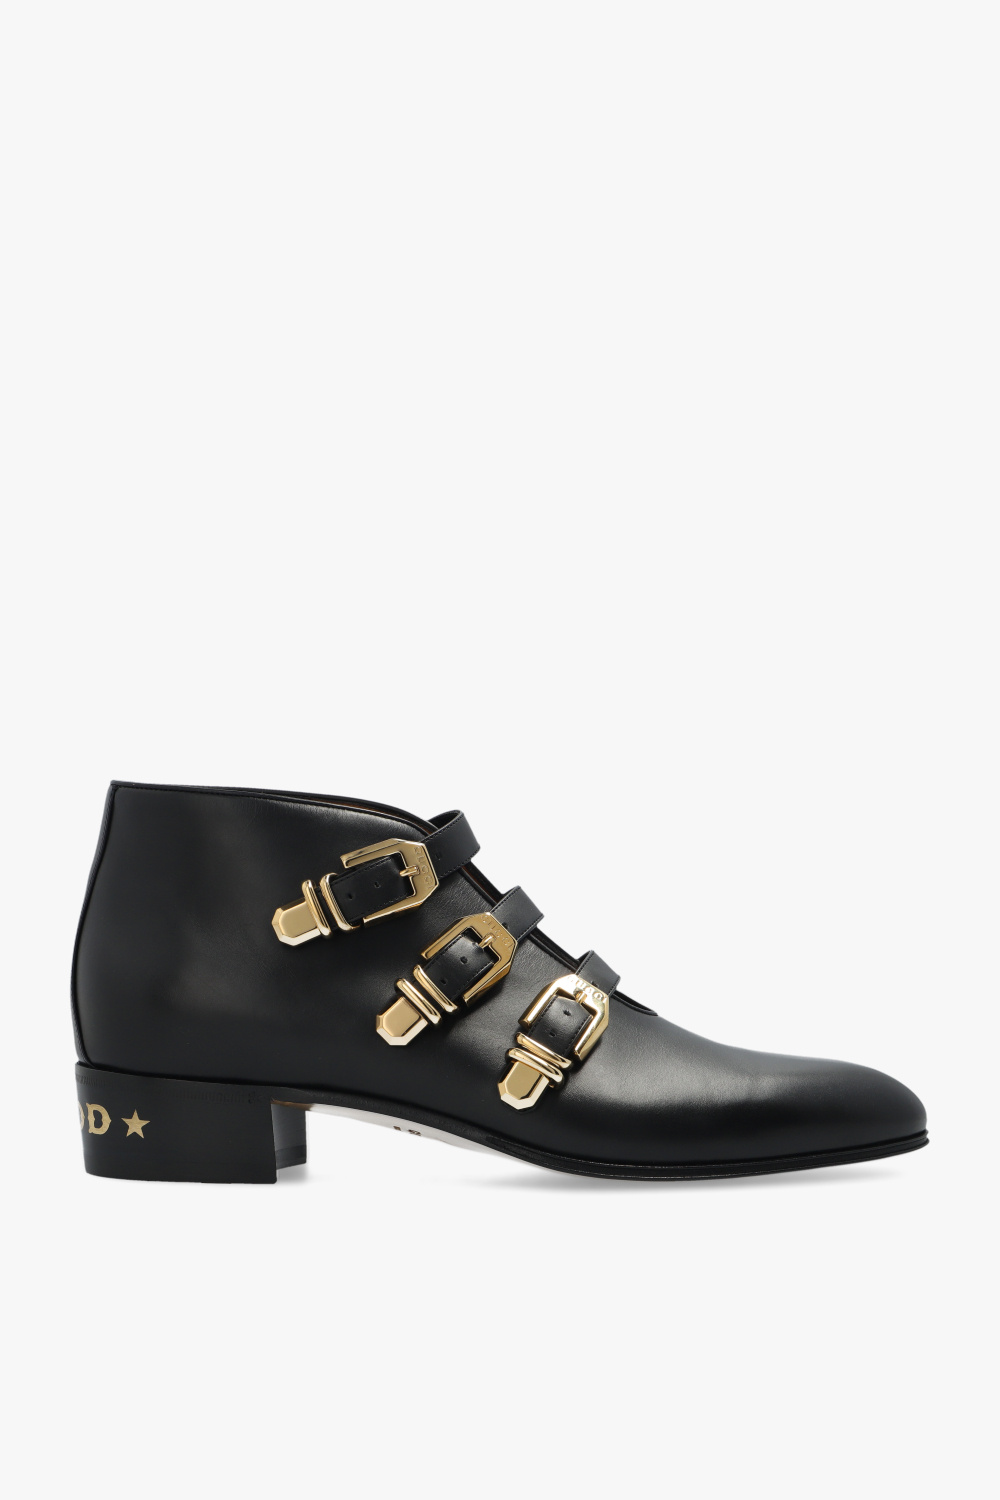 Gucci Embellished ankle boots